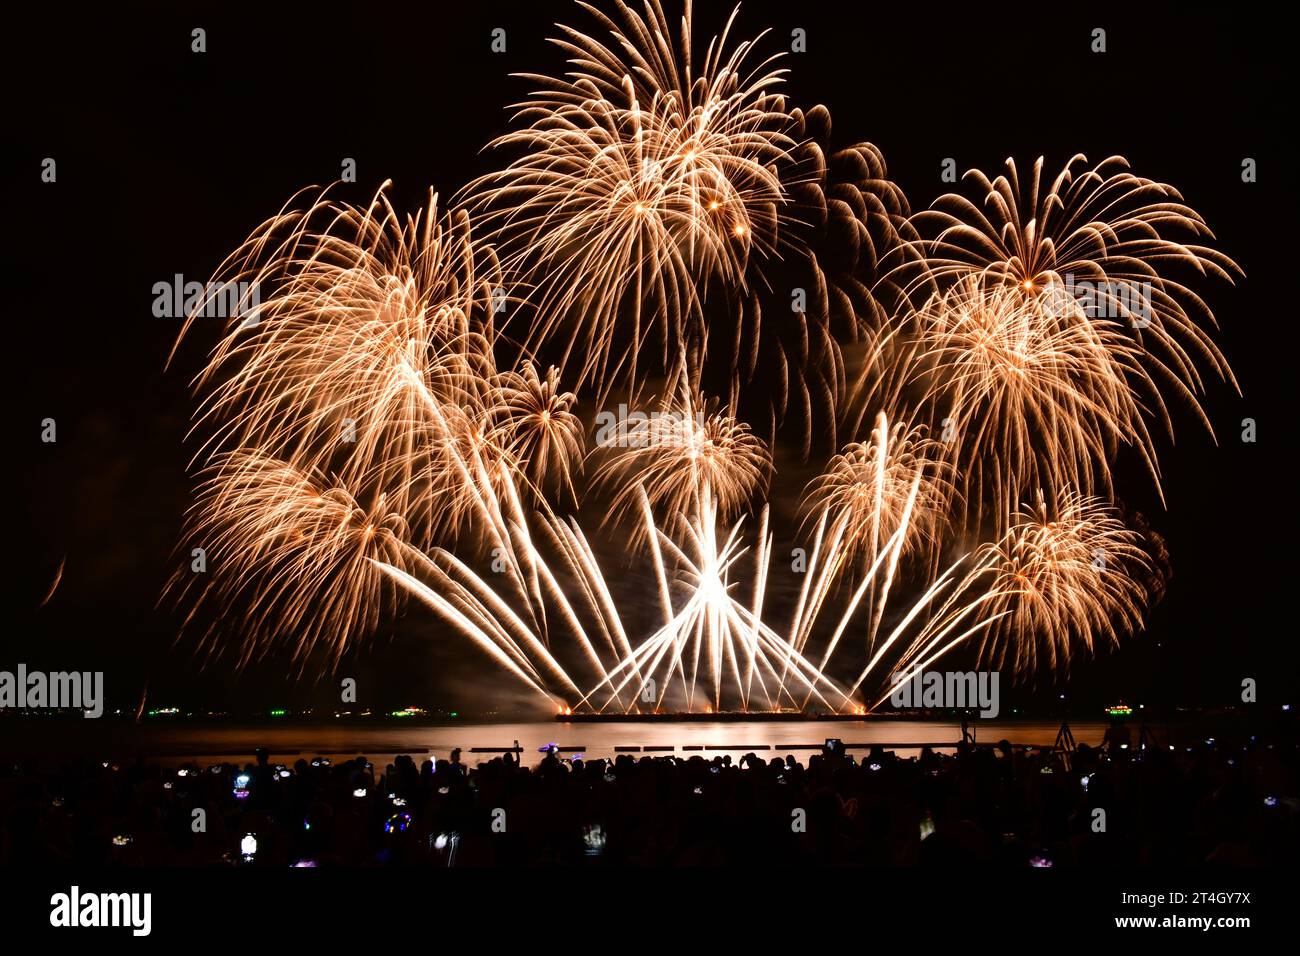 Joyful moment of people capturing fireworks show with camera and smart phone. Pattaya fireworks festtval. Stock Photo